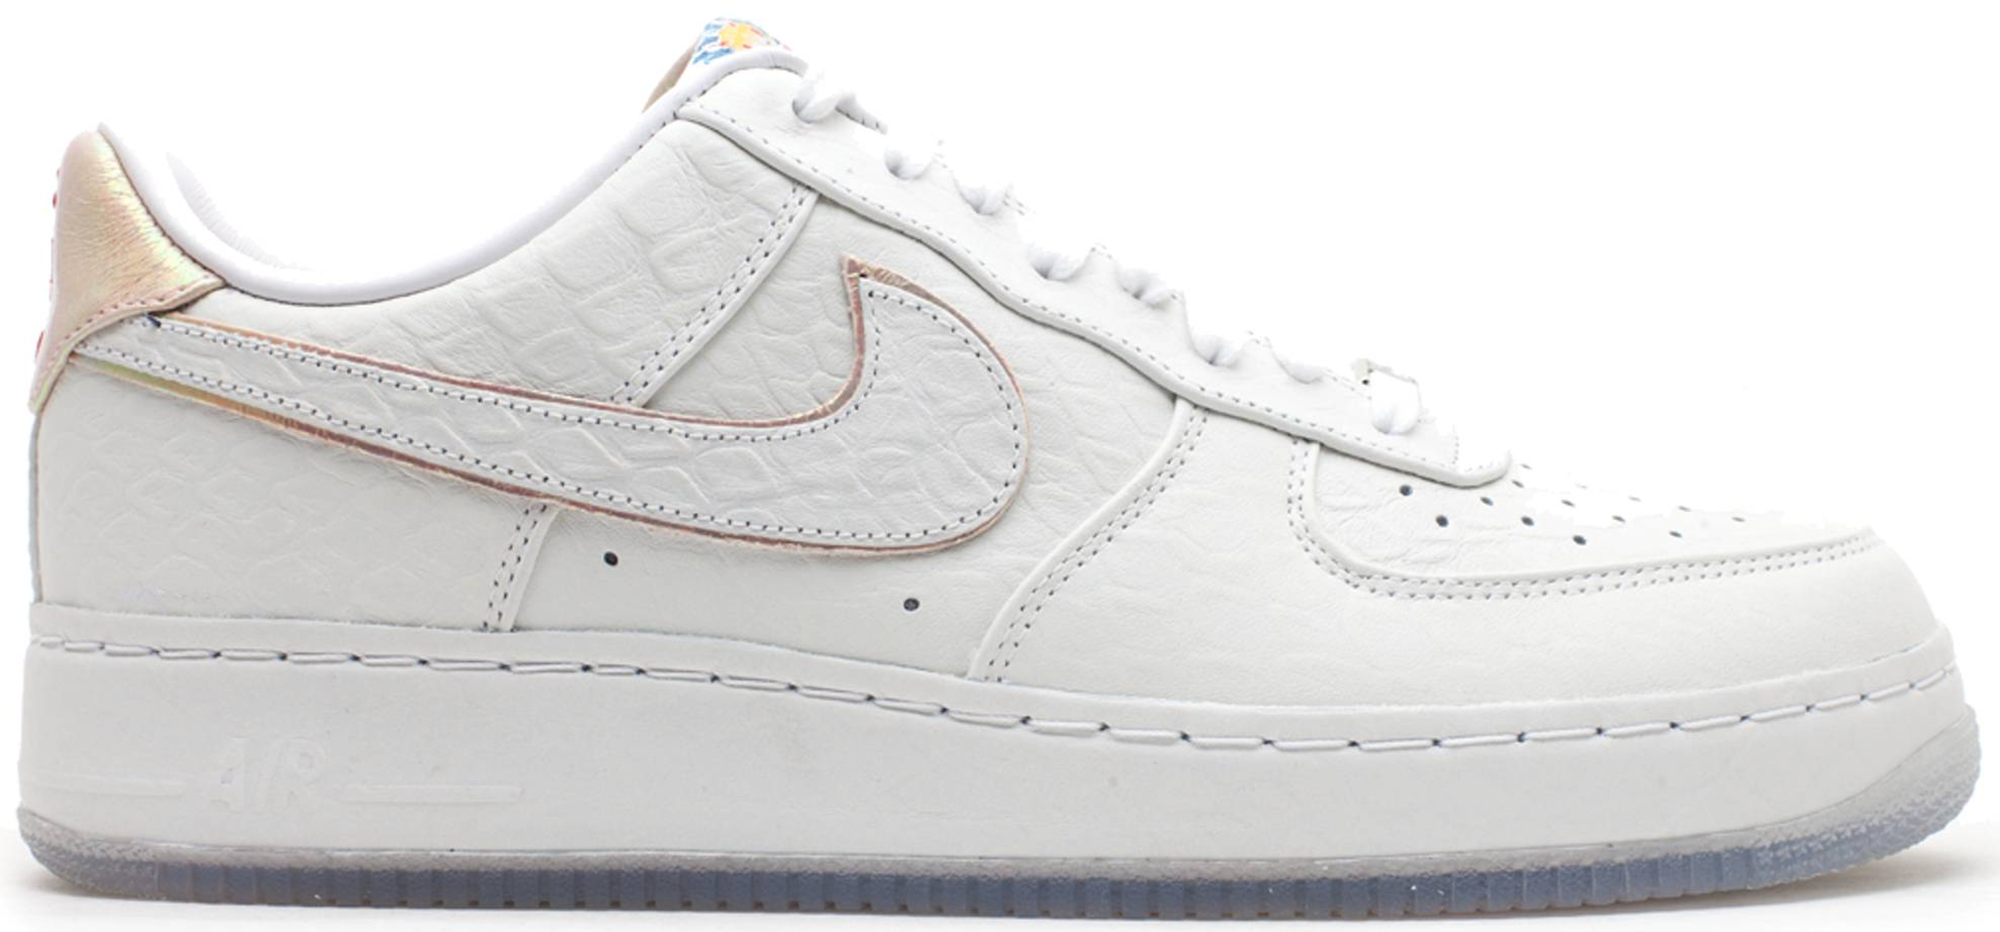 Nike Air Force 1 Low Insideout White 